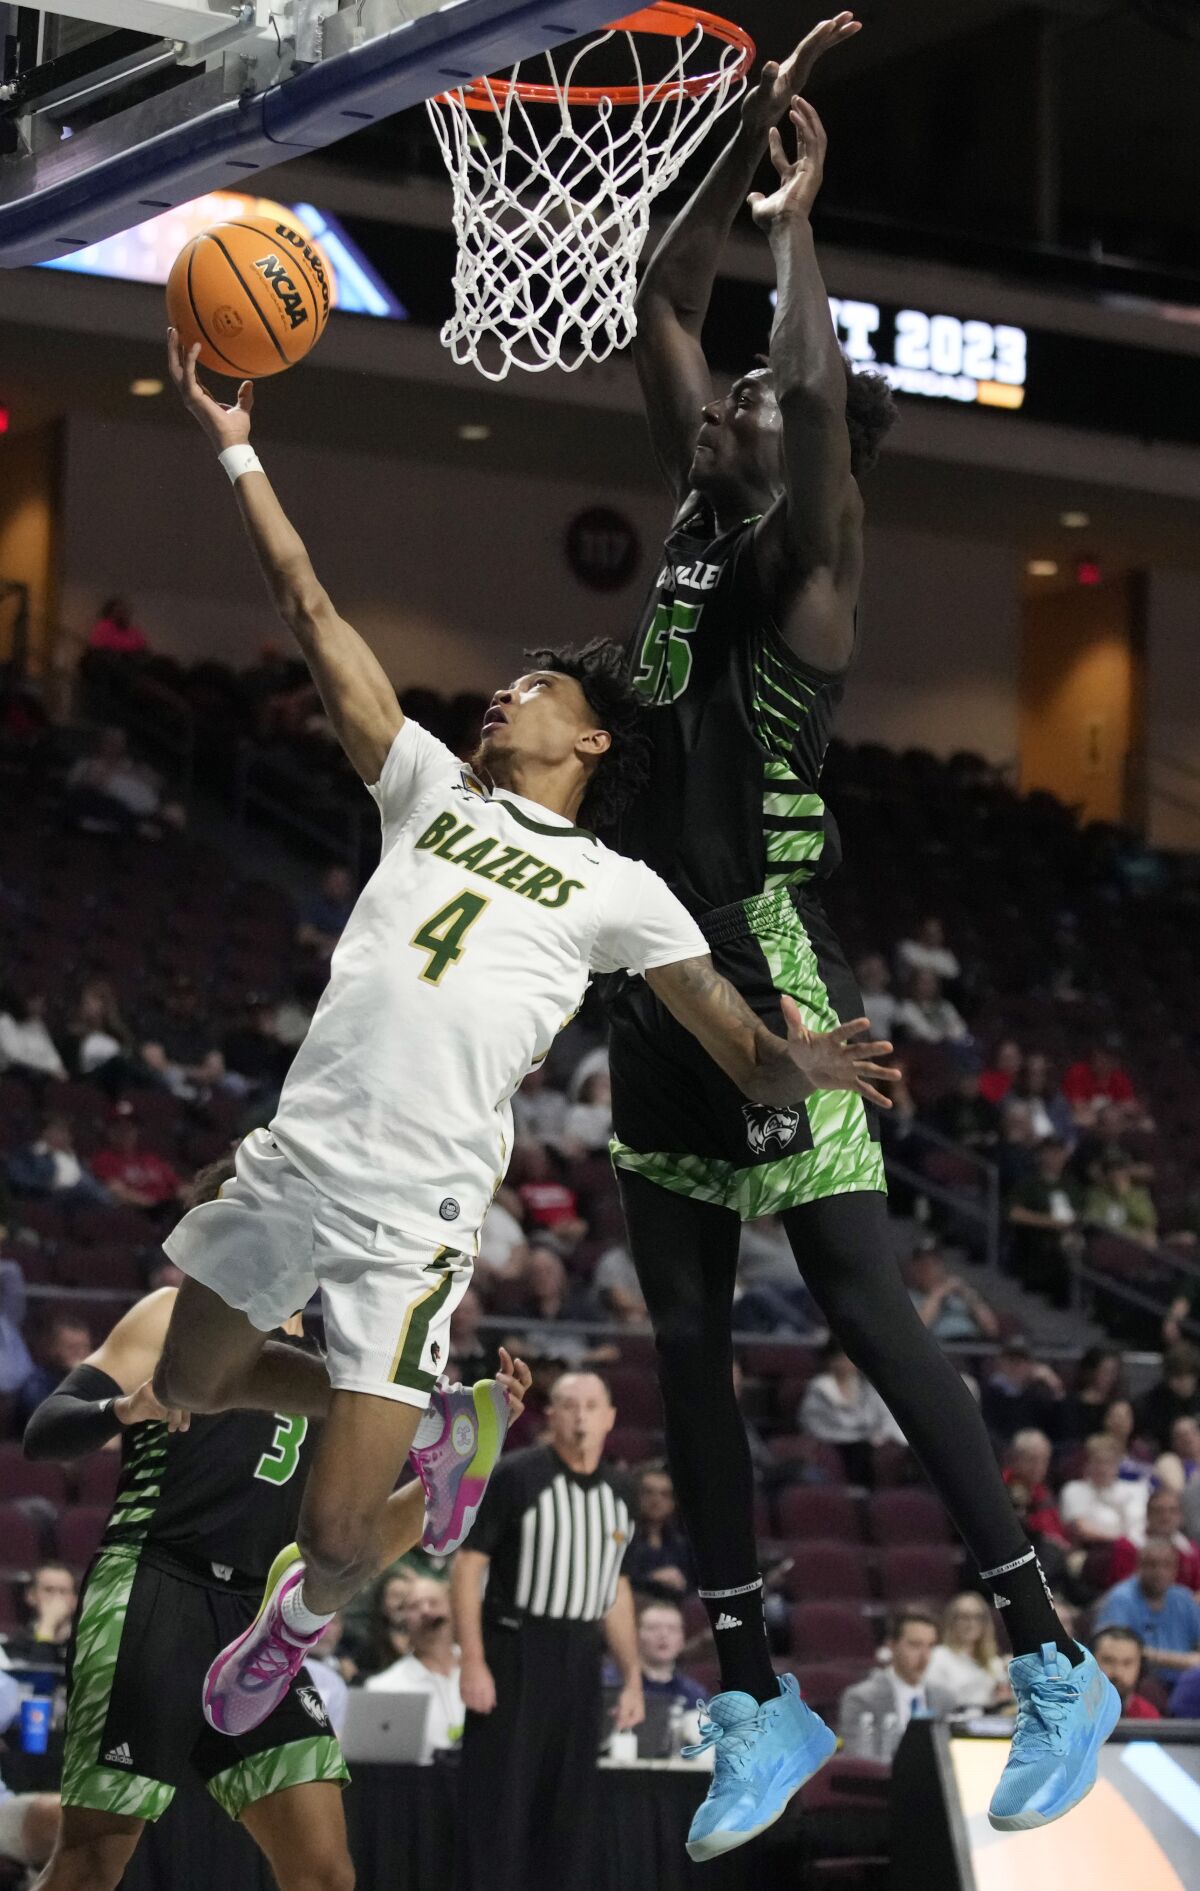 UAB's Eric Gaines (4) shoots around Utah Valley's Aziz Bandaogo (55) during the first half of an NCAA college basketball game in the semifinals of the NIT, Tuesday, March 28, 2023, in Las Vegas. (AP Photo/John Locher)